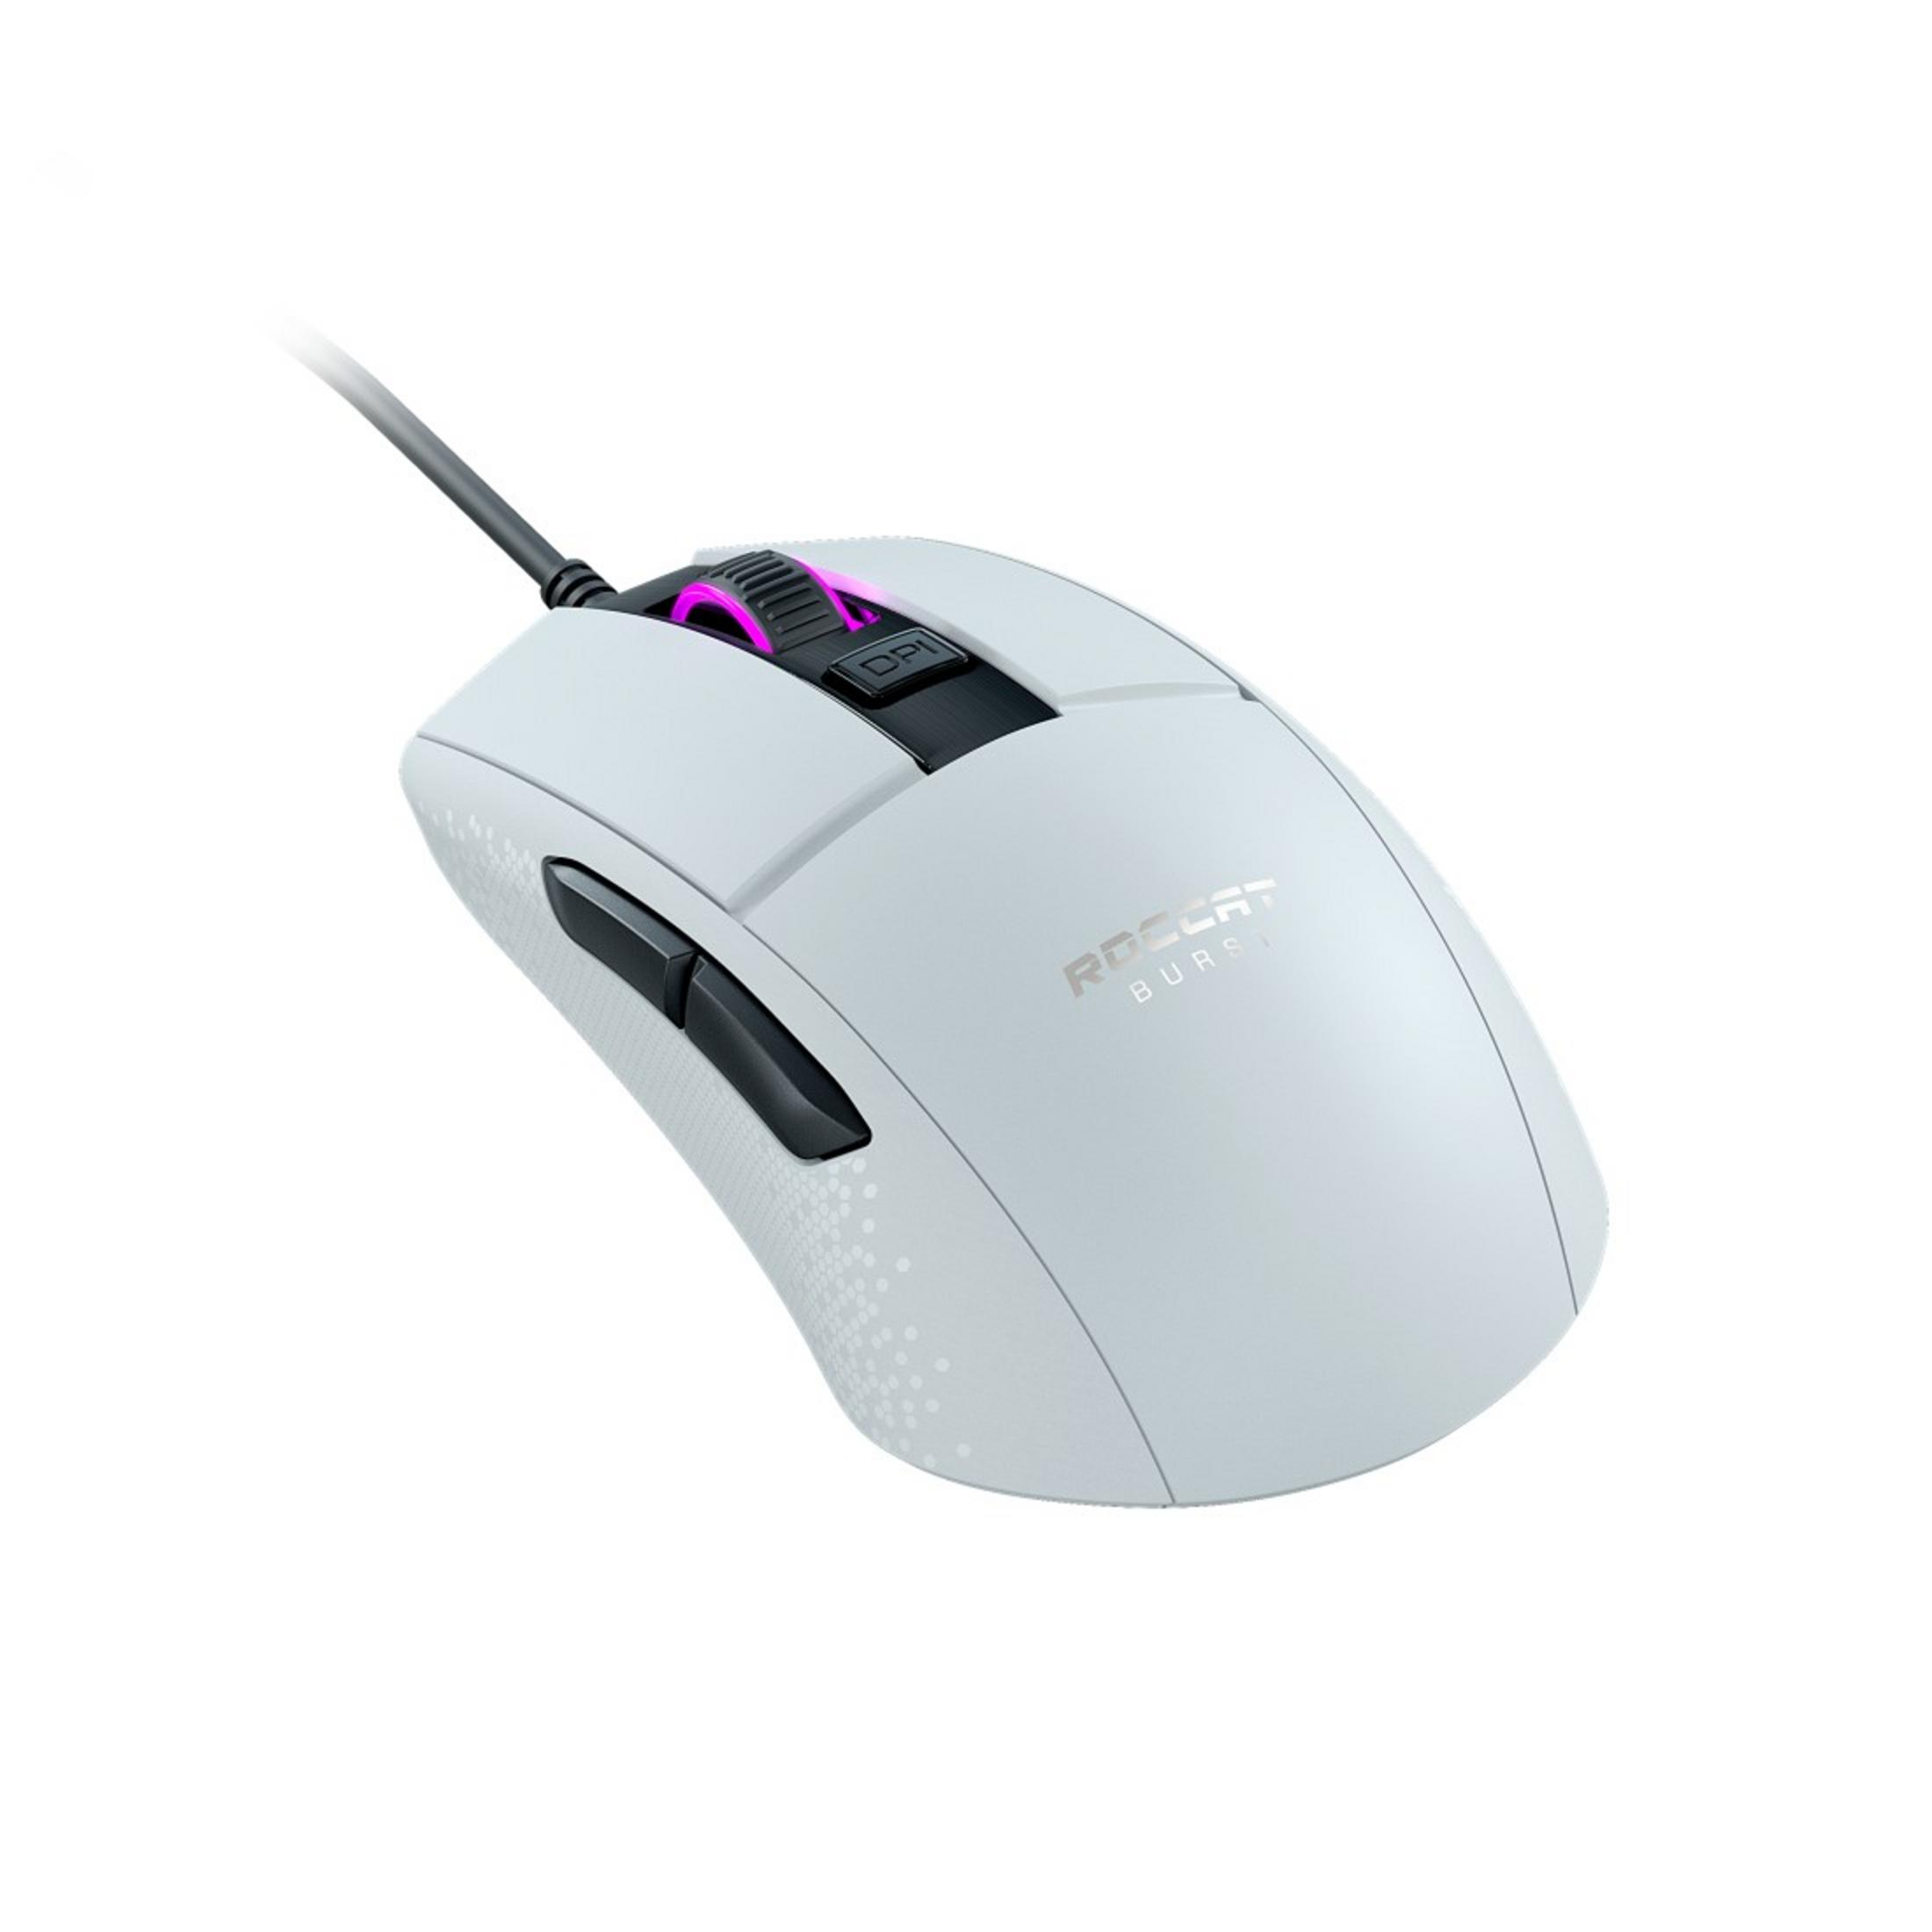 ROCCAT ROC-11-751 Weiß MOUSE CORE Gaming WI BURST Maus